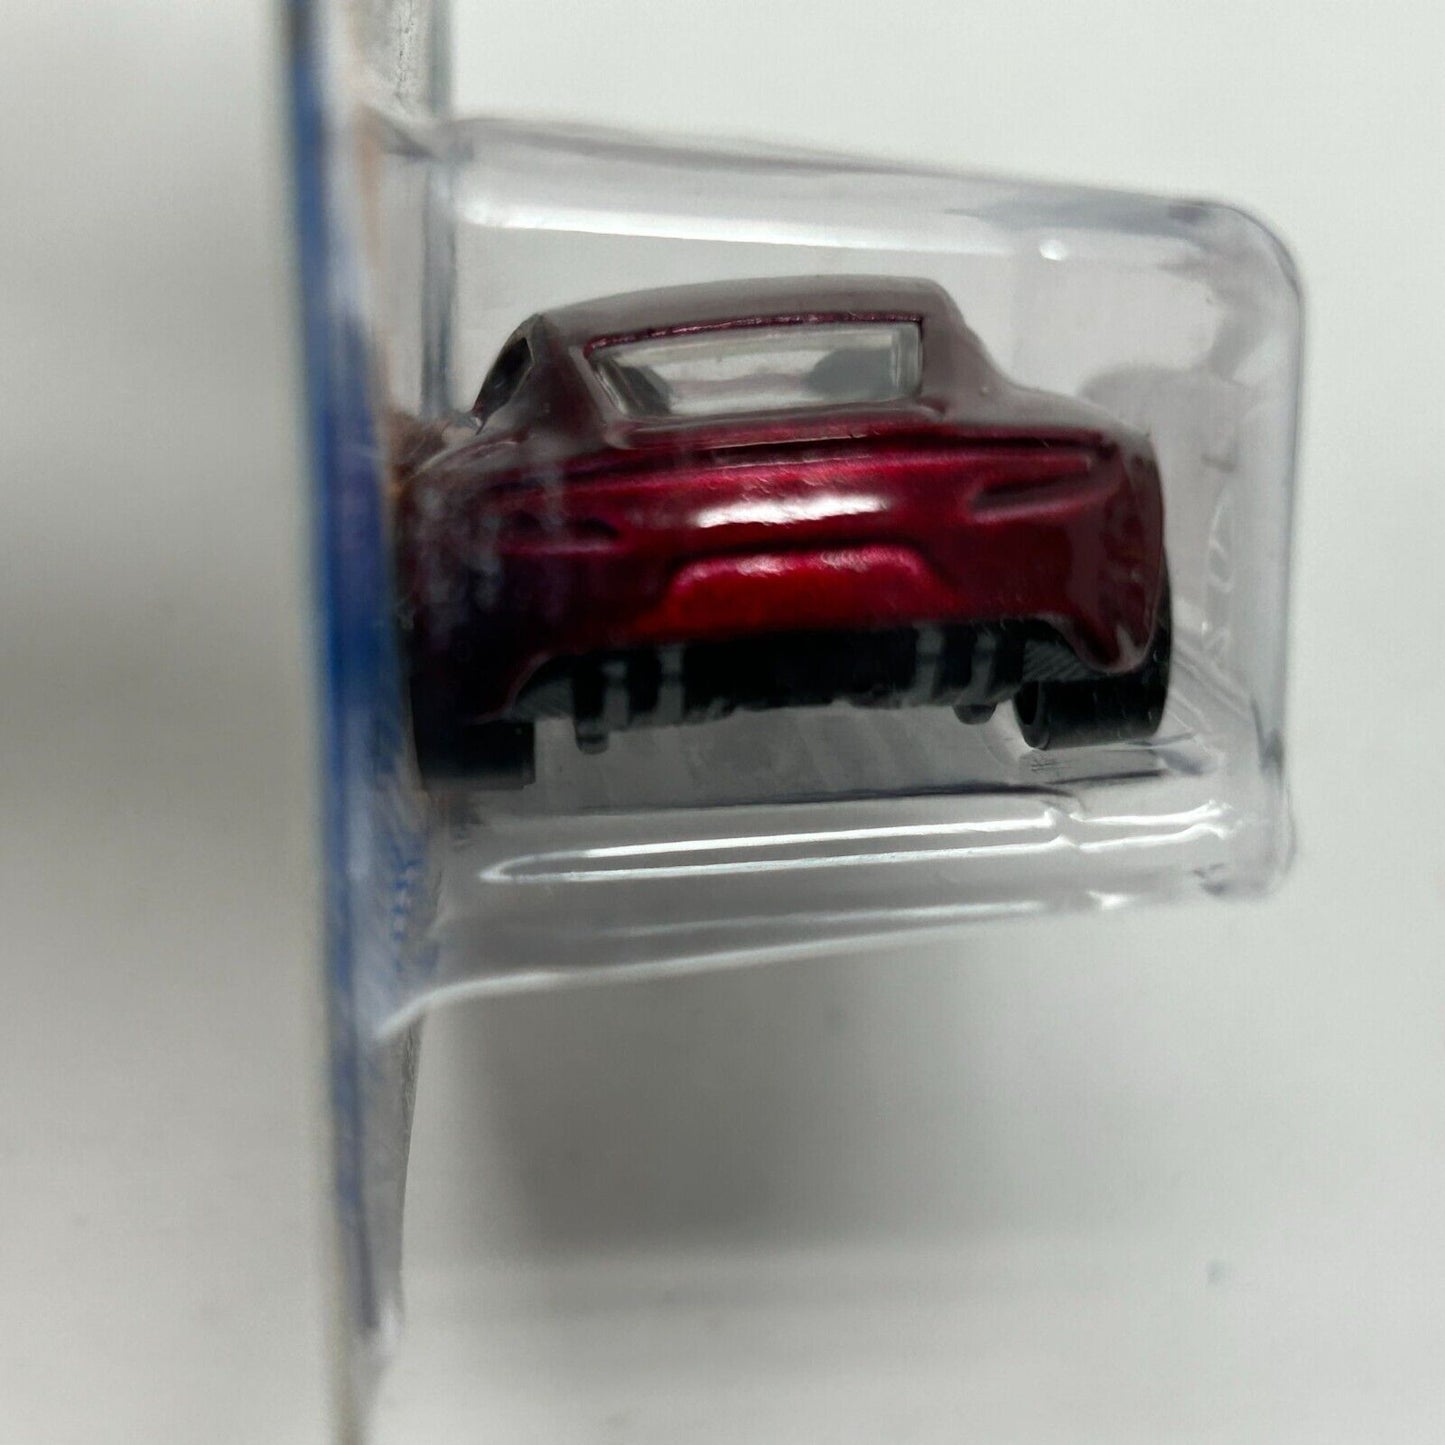 Aston Martin One-77 Hot Wheels Collectible Diecast Car Red Short Card 2012 New